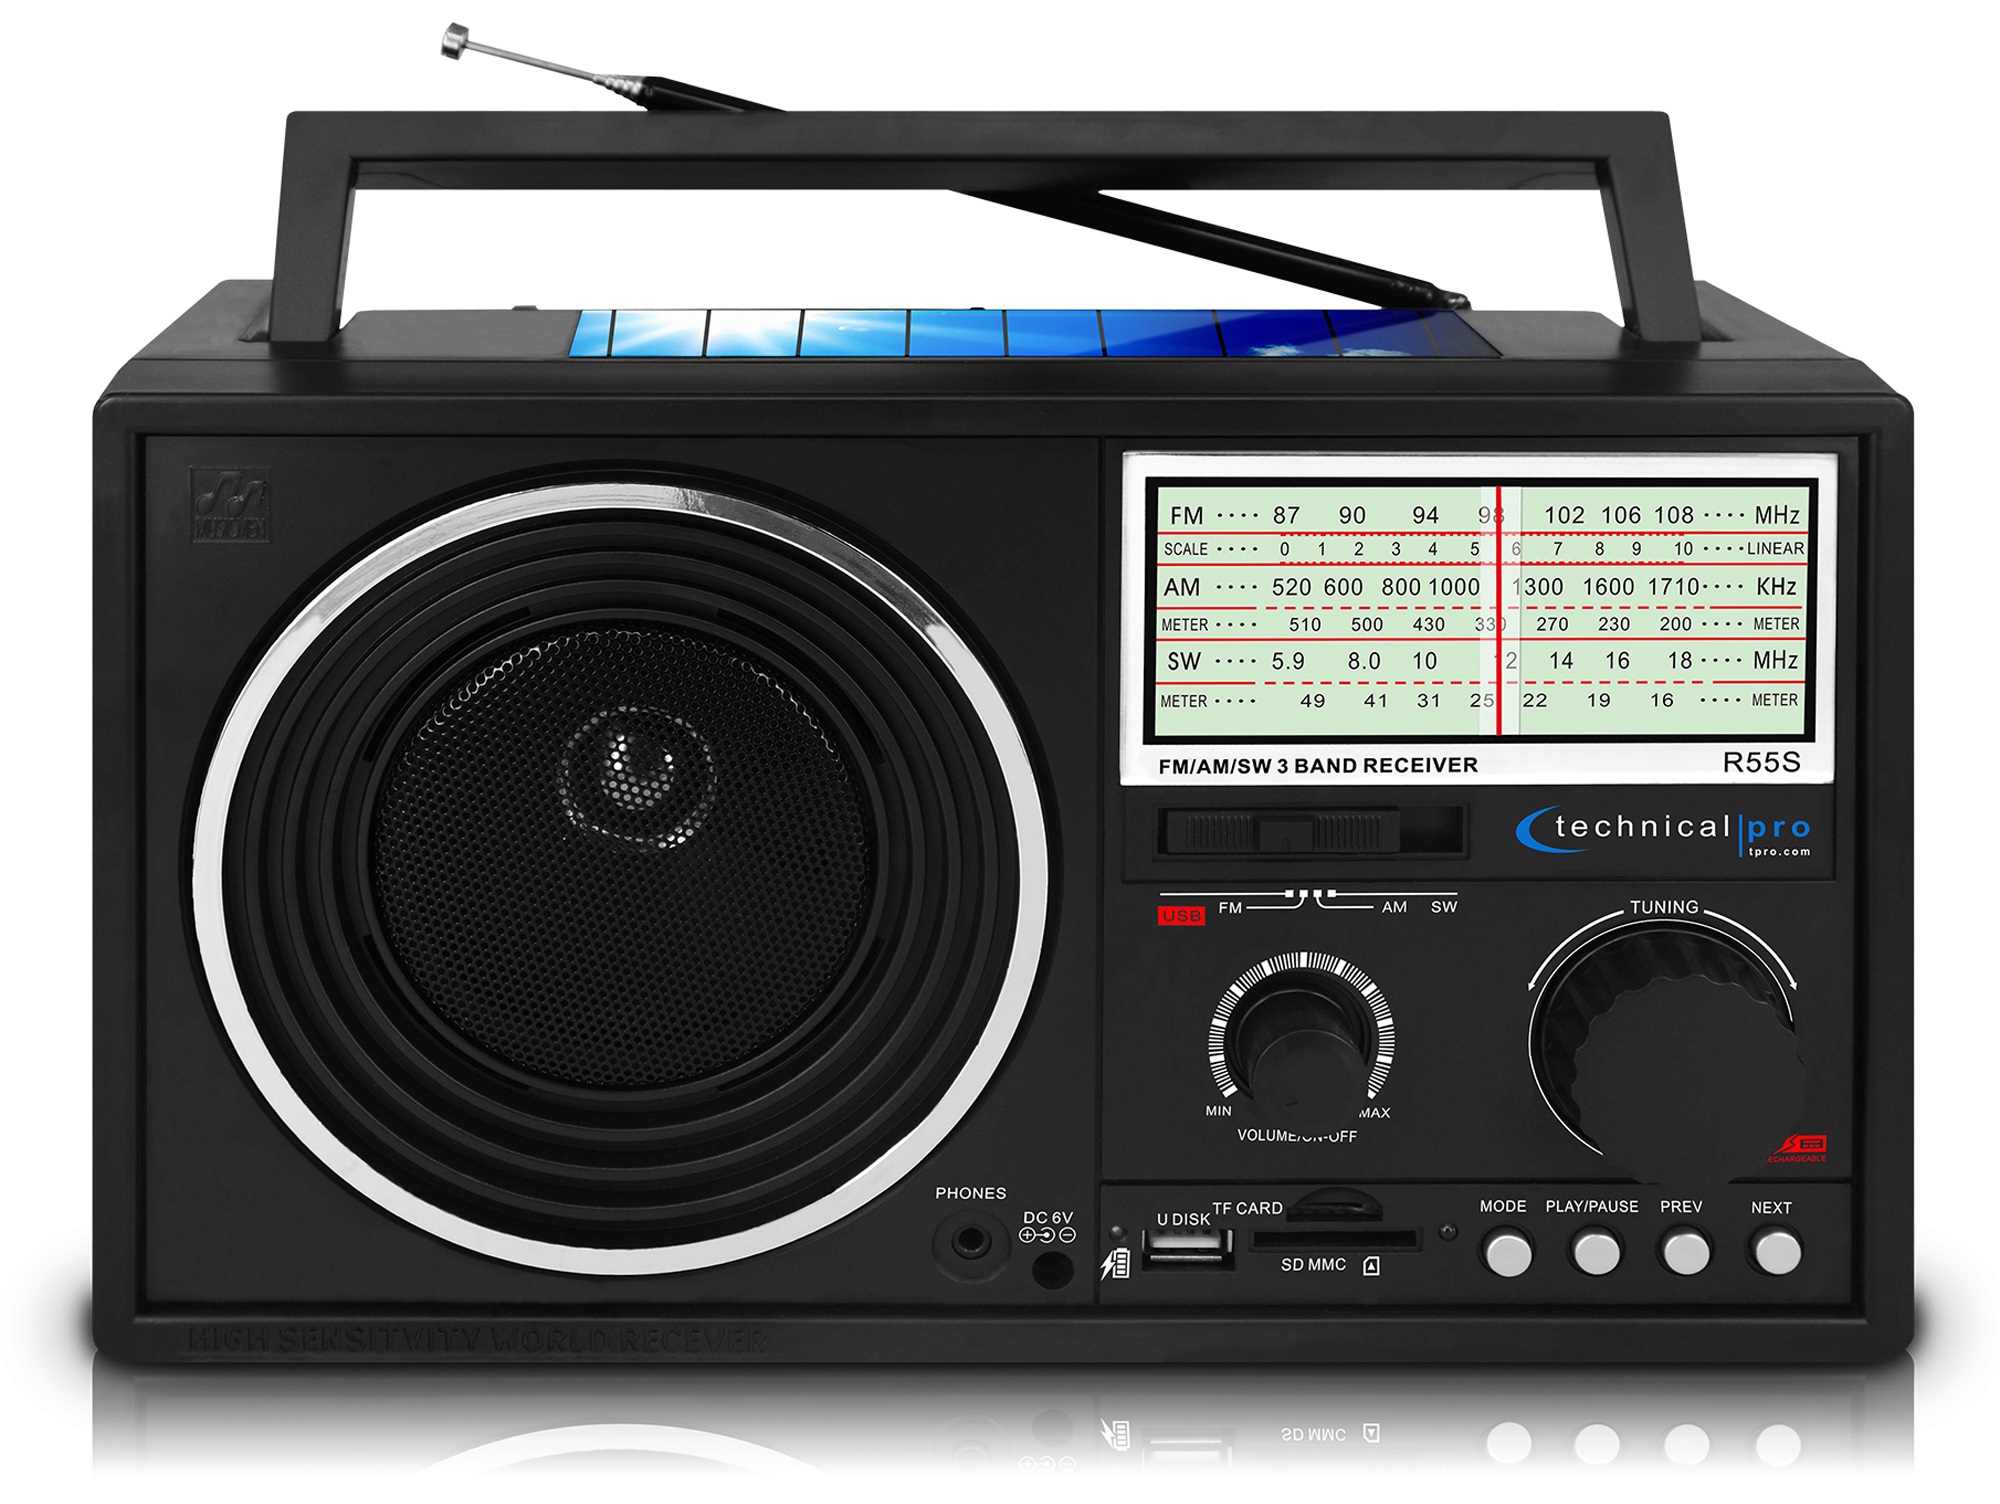 Technical Pro Tpr55s Portable Handheld Shortwave Am Fm Dial Radio Speaker With Usb Sd Input